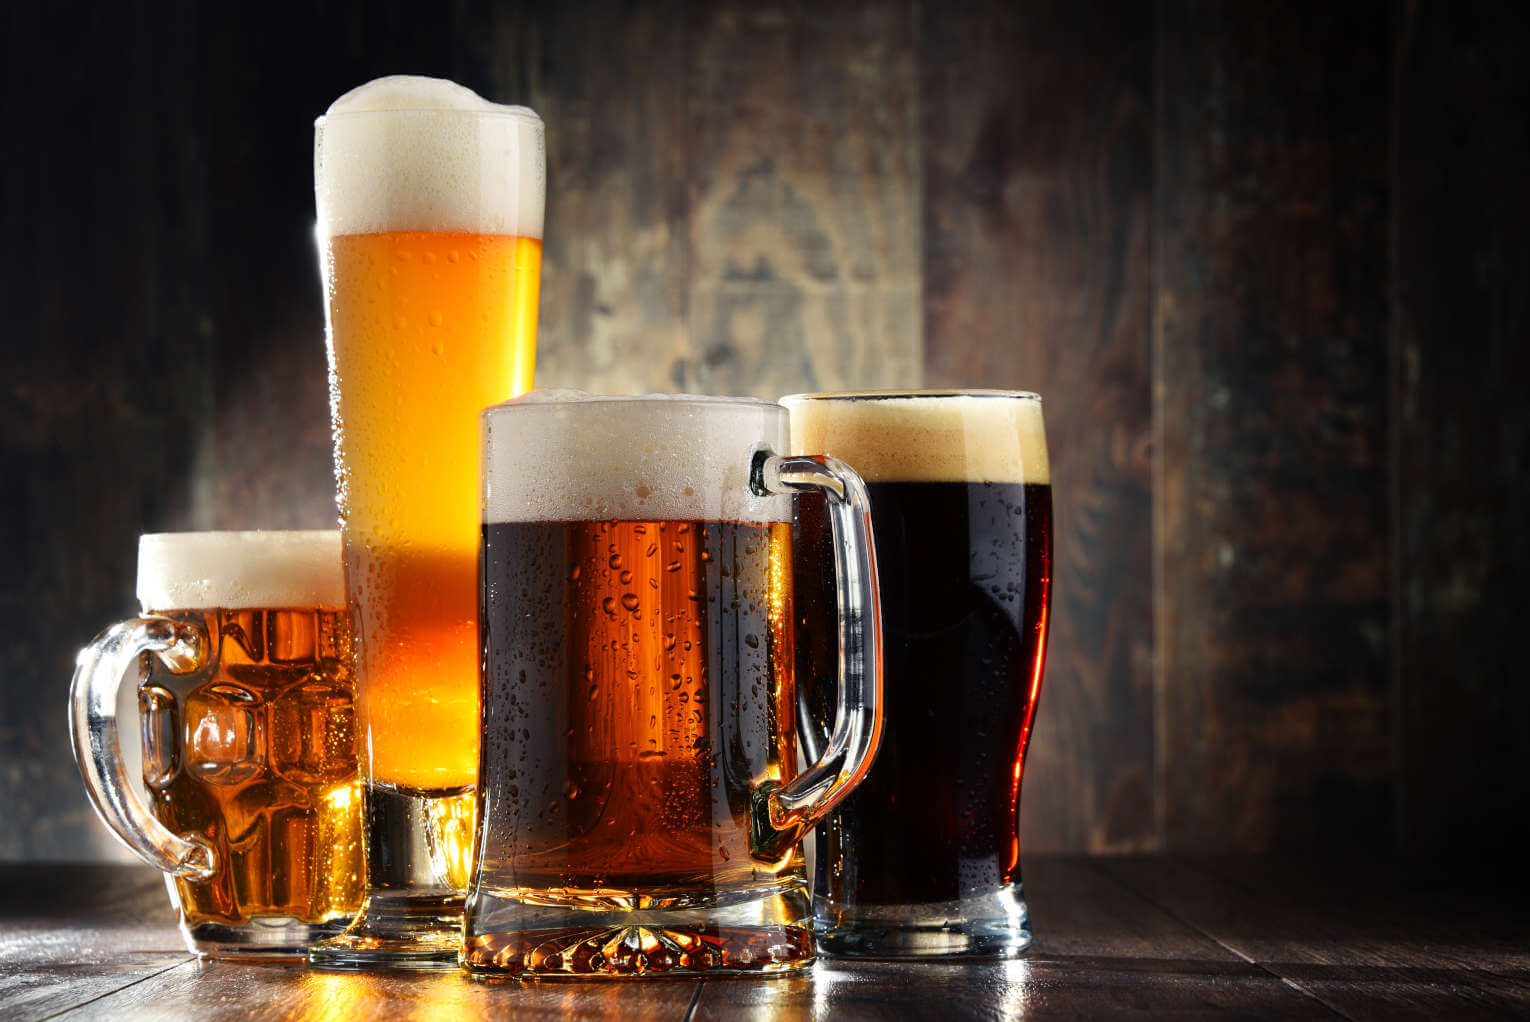 Toast to Time Lost: Study Links Daily Beer to Lower Life Expectancy